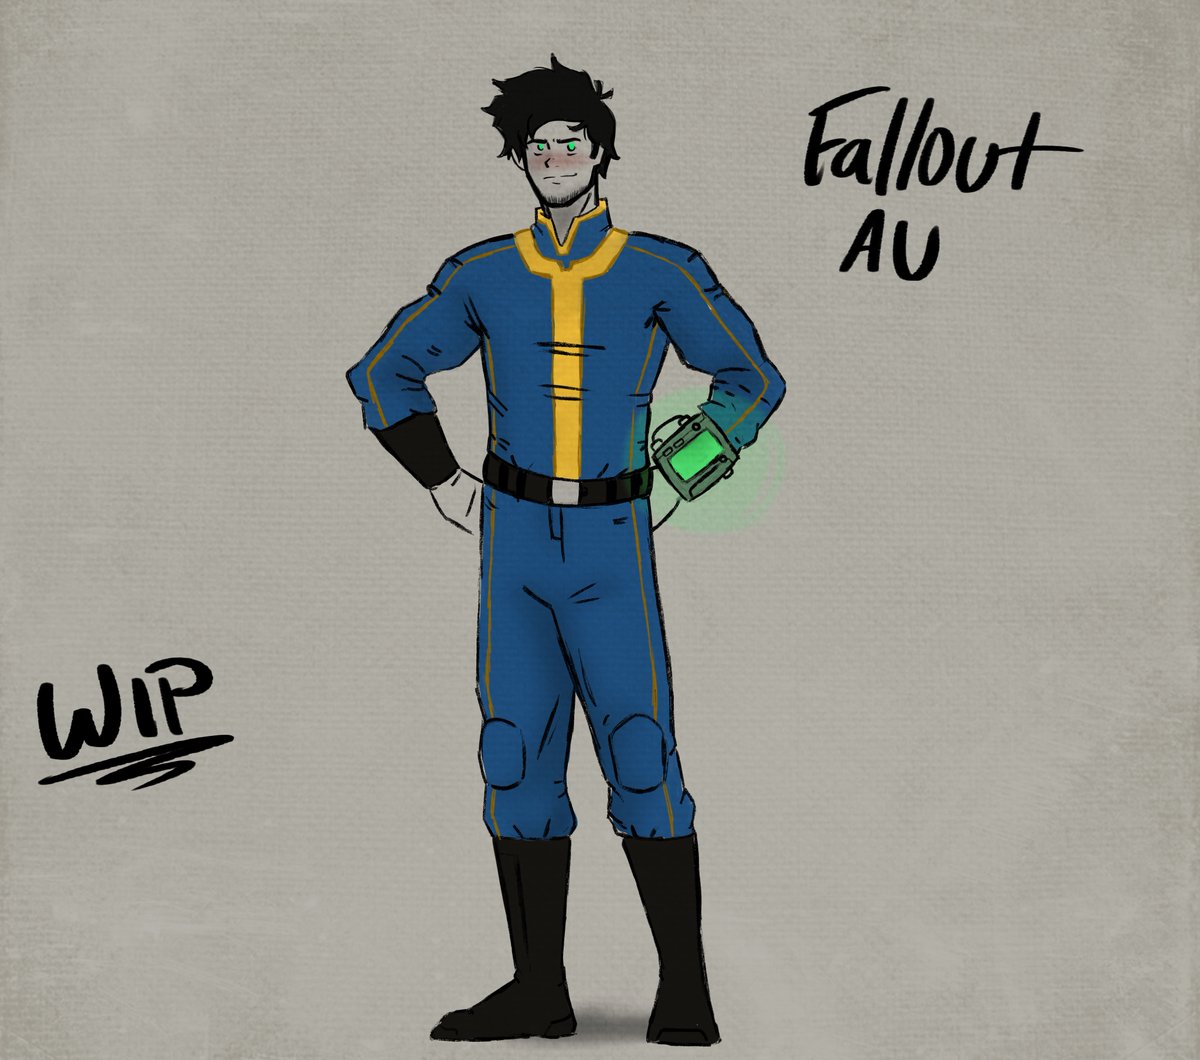 Also a big fan of Fallout 😶

Another version of Jim, I suppose (work in progress)

#Fallout 
#ocart